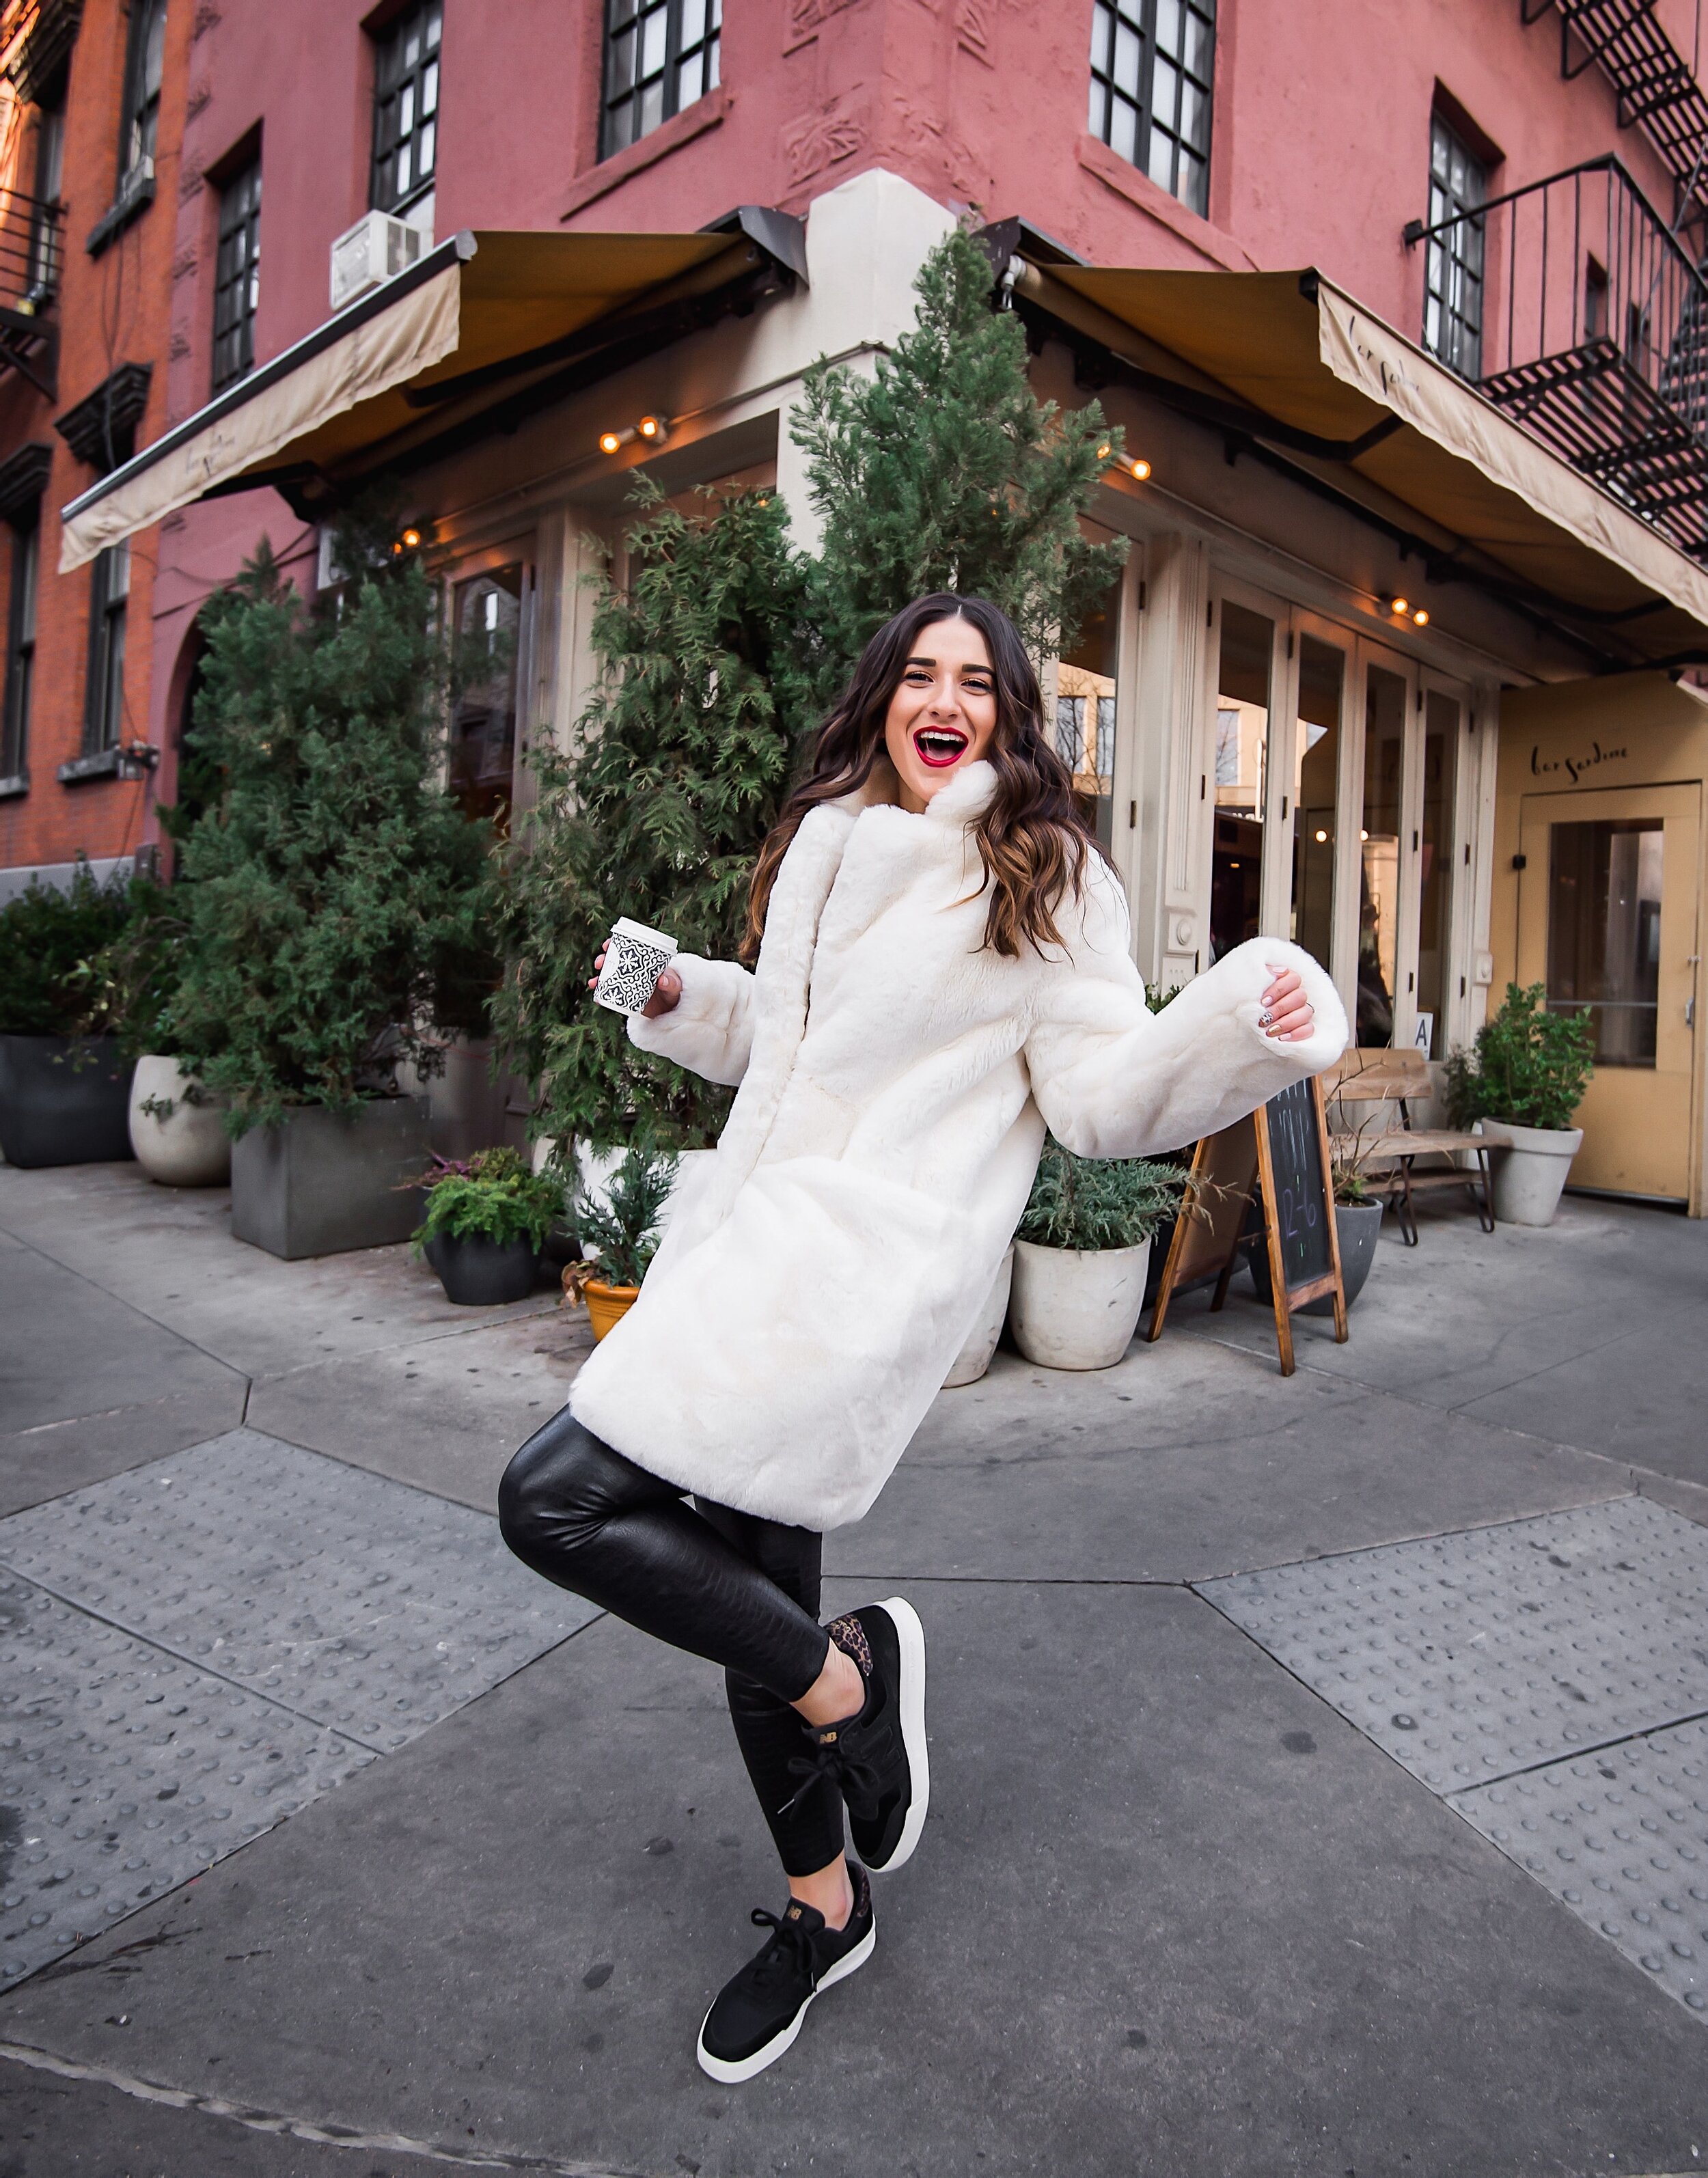 White Fur Coat Black Snakeskin Leggings Esther Santer NYC Street Style Fashion Blog Winter Outfit OOTD Faux Fur Commando Nordstrom Maman Coffee Happy Girl Women Shopping Buy Red Lipstick Taxi Photography Manhattan Comfortable West Village Location.JPG